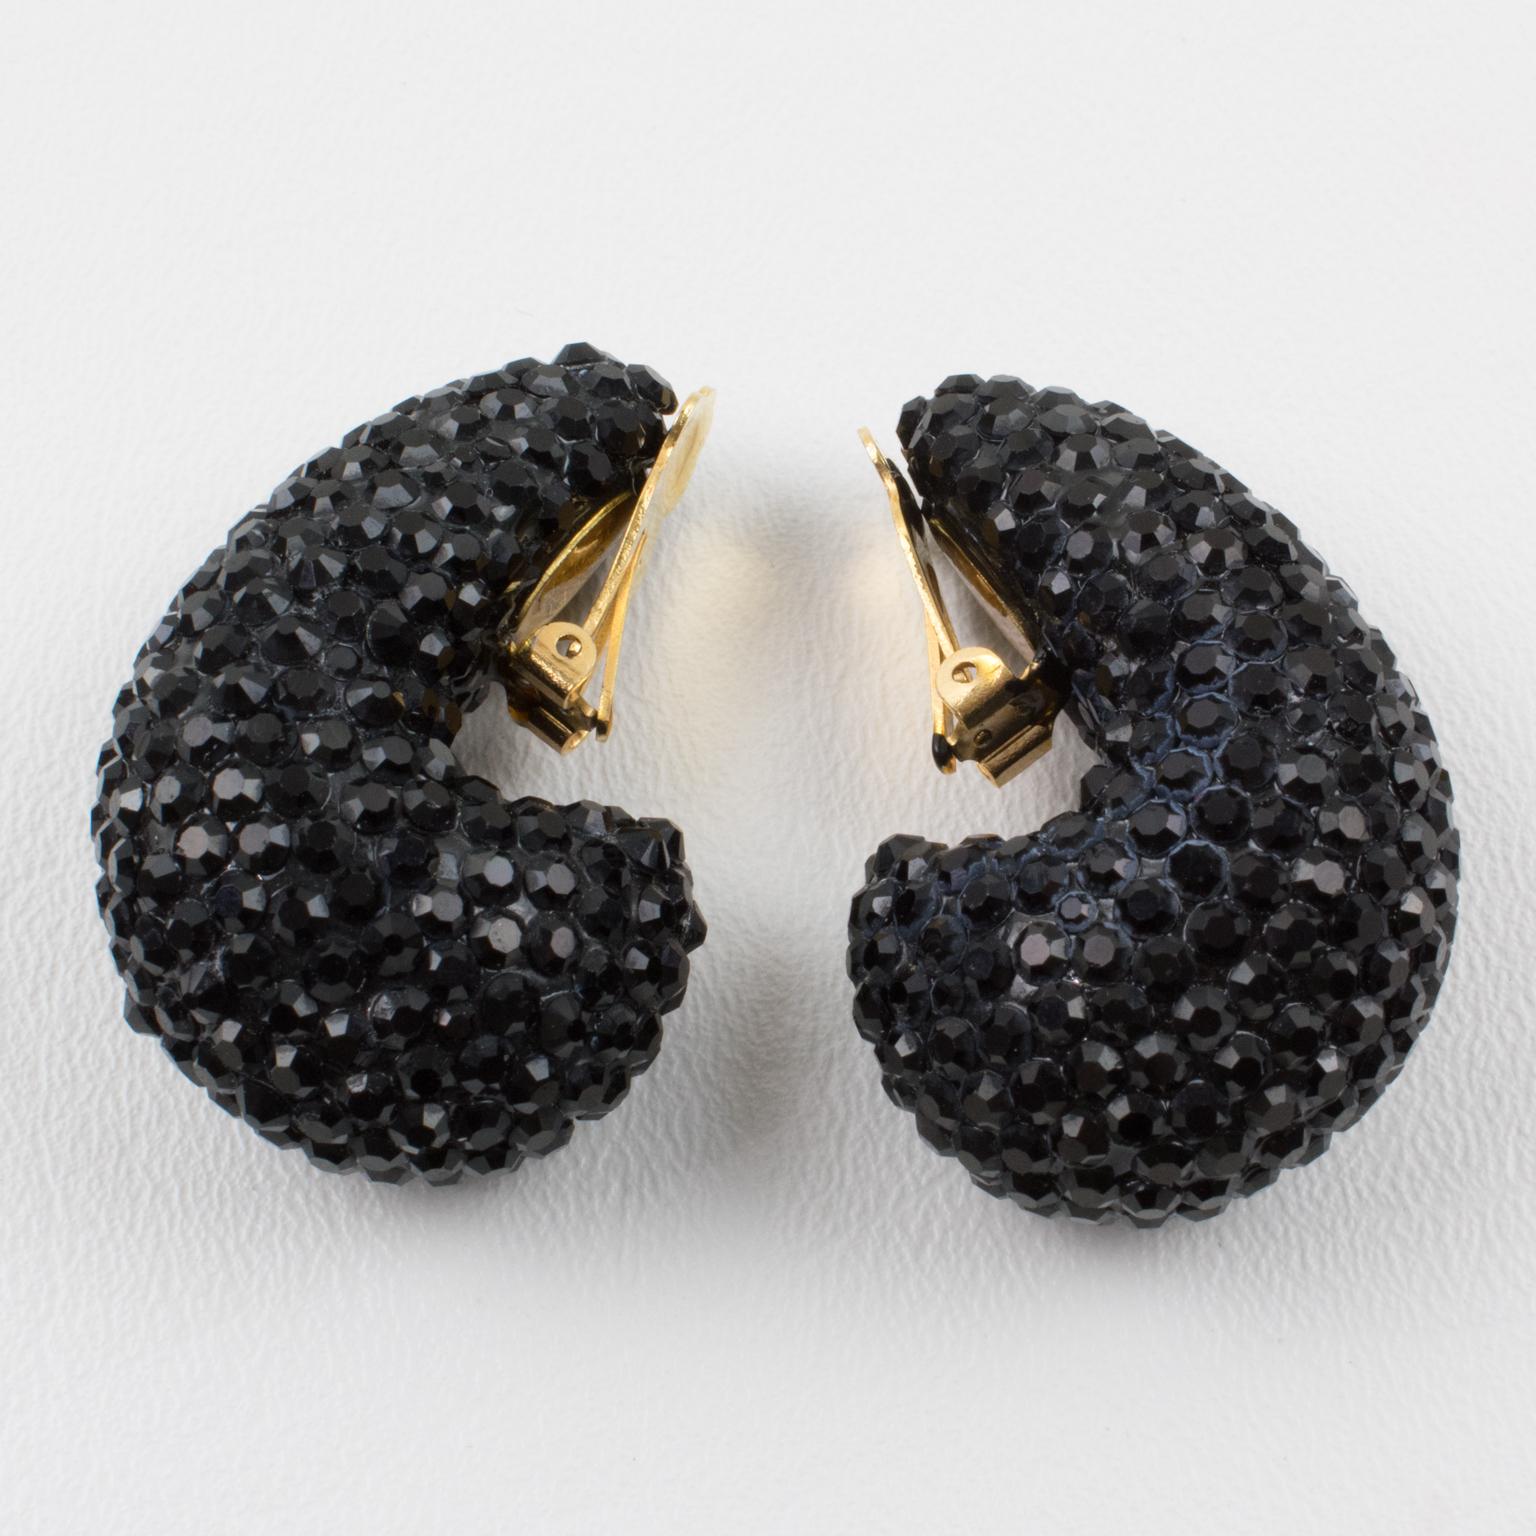 Impressive statement clip-on earrings designed by Richard Kerr in the 1980s. They are made up of his signature pave crystals. Featuring nautilus shape all covered with licorice black color rhinestones. Marked at the back with the designer tag